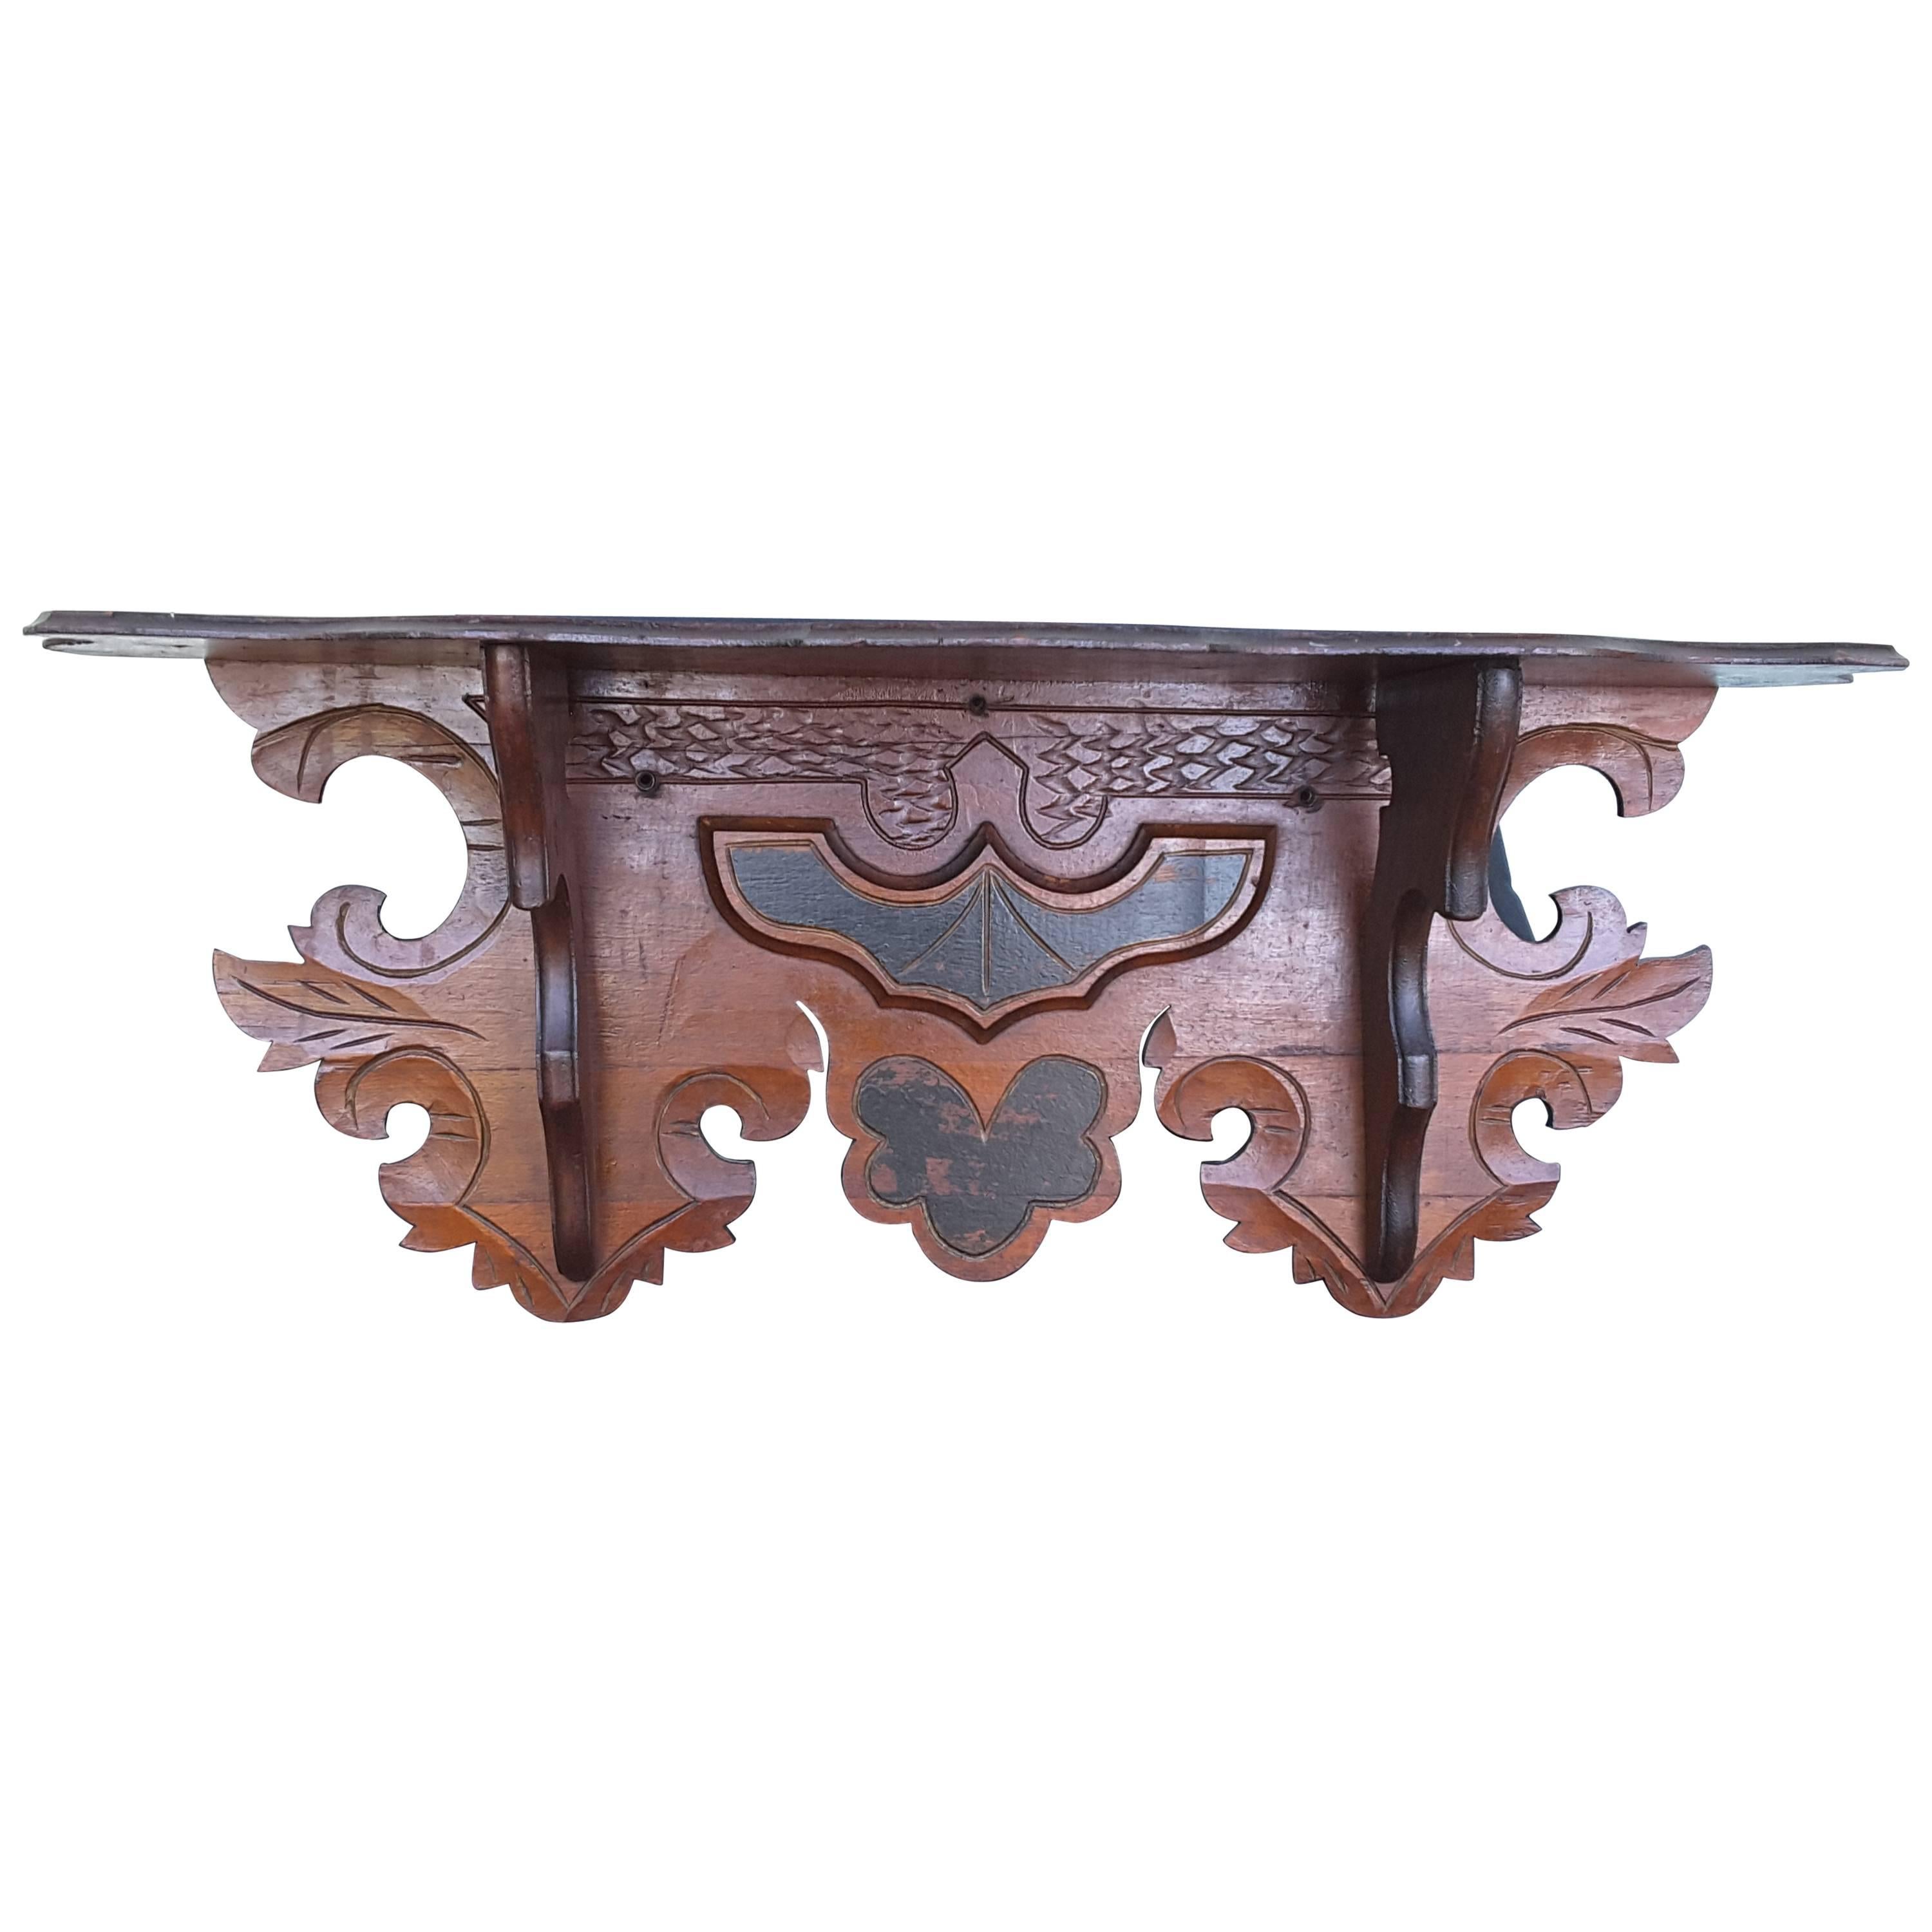 Edwardian Solid Walnut Carved Wall, Clock Shelf with Black Accented Highlights